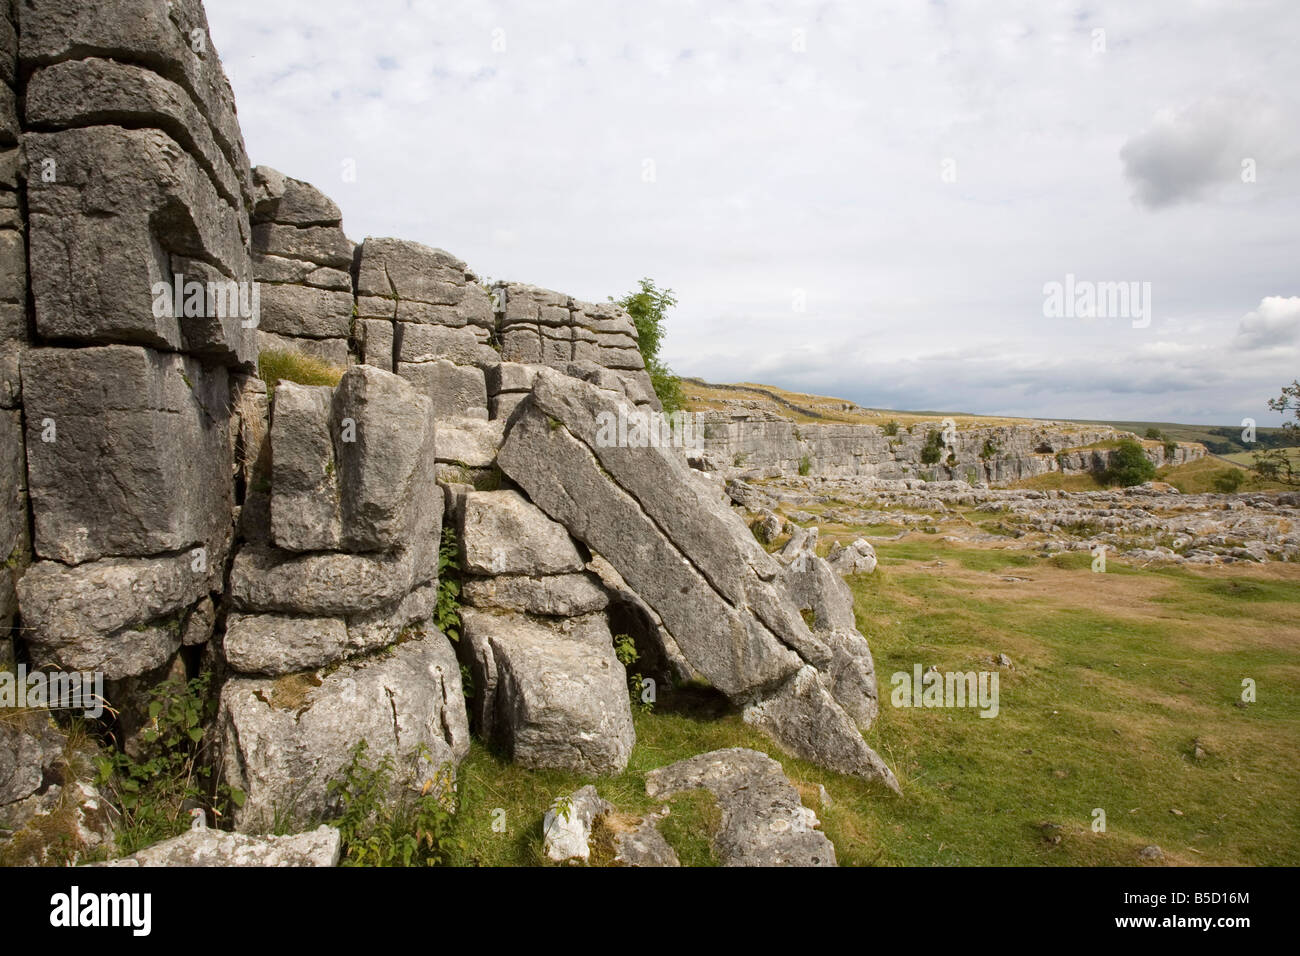 Limestone pavement and weathering above Malham Cove, Yorkshire Dales National Park, North Yorkshire, England, Europe Stock Photo